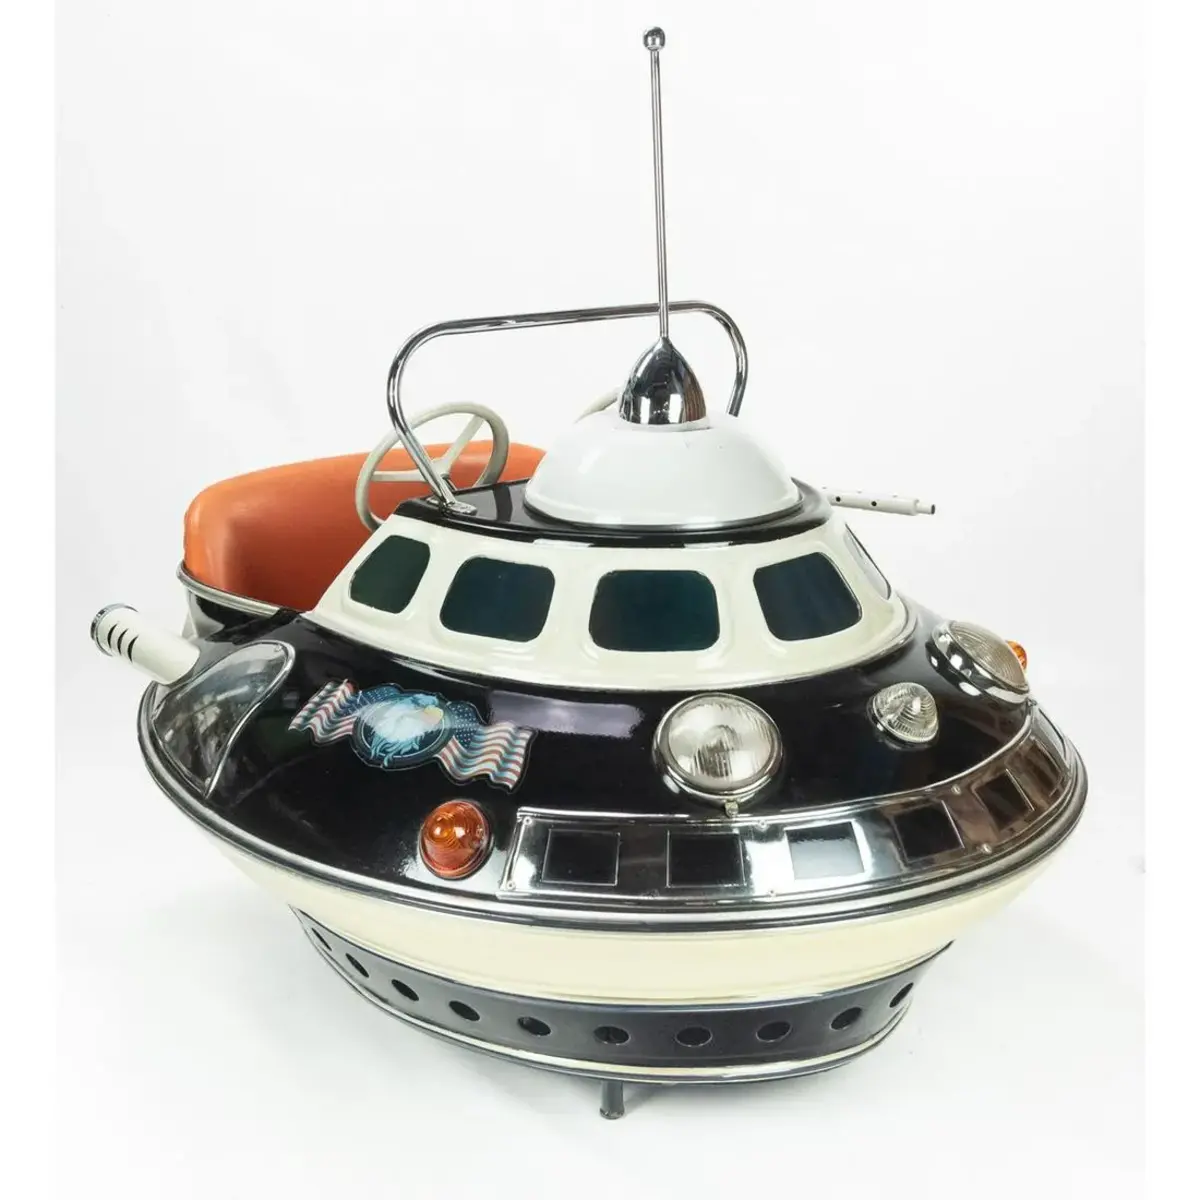 An extremely rare Space Age carnival amusement park ride flying saucer UFO, made by L'Autopede of Belgium, late 1950s. The hand-fabricated metal two-seat carousel ride is in vintage science-fiction style and an extremely rare piece of carnival/amusement park art, complete with original antenna and working “clickity-clack” machine gun. Estimate: $15,000-$40,000.